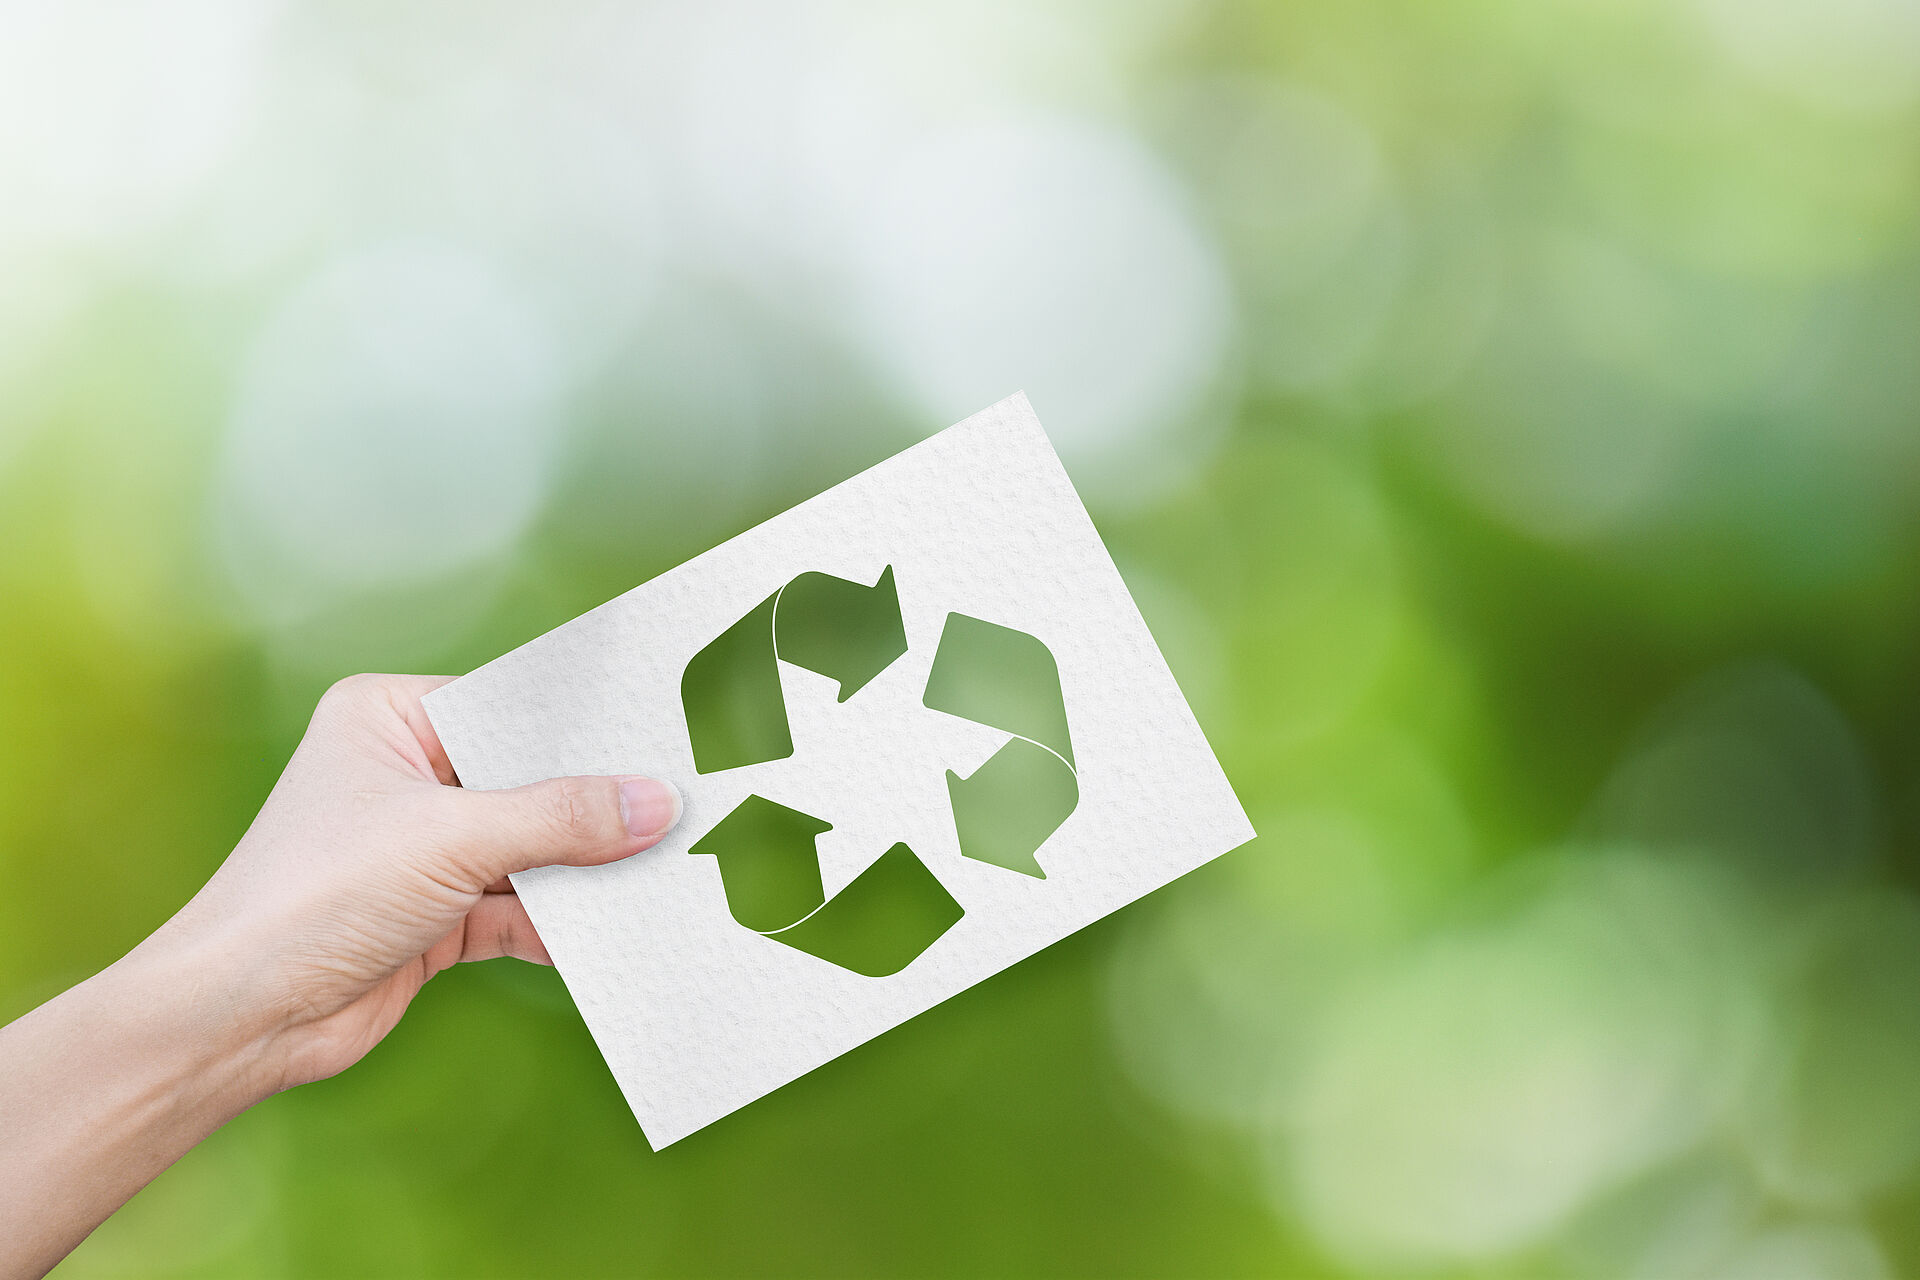 About FAULHABER Recycling